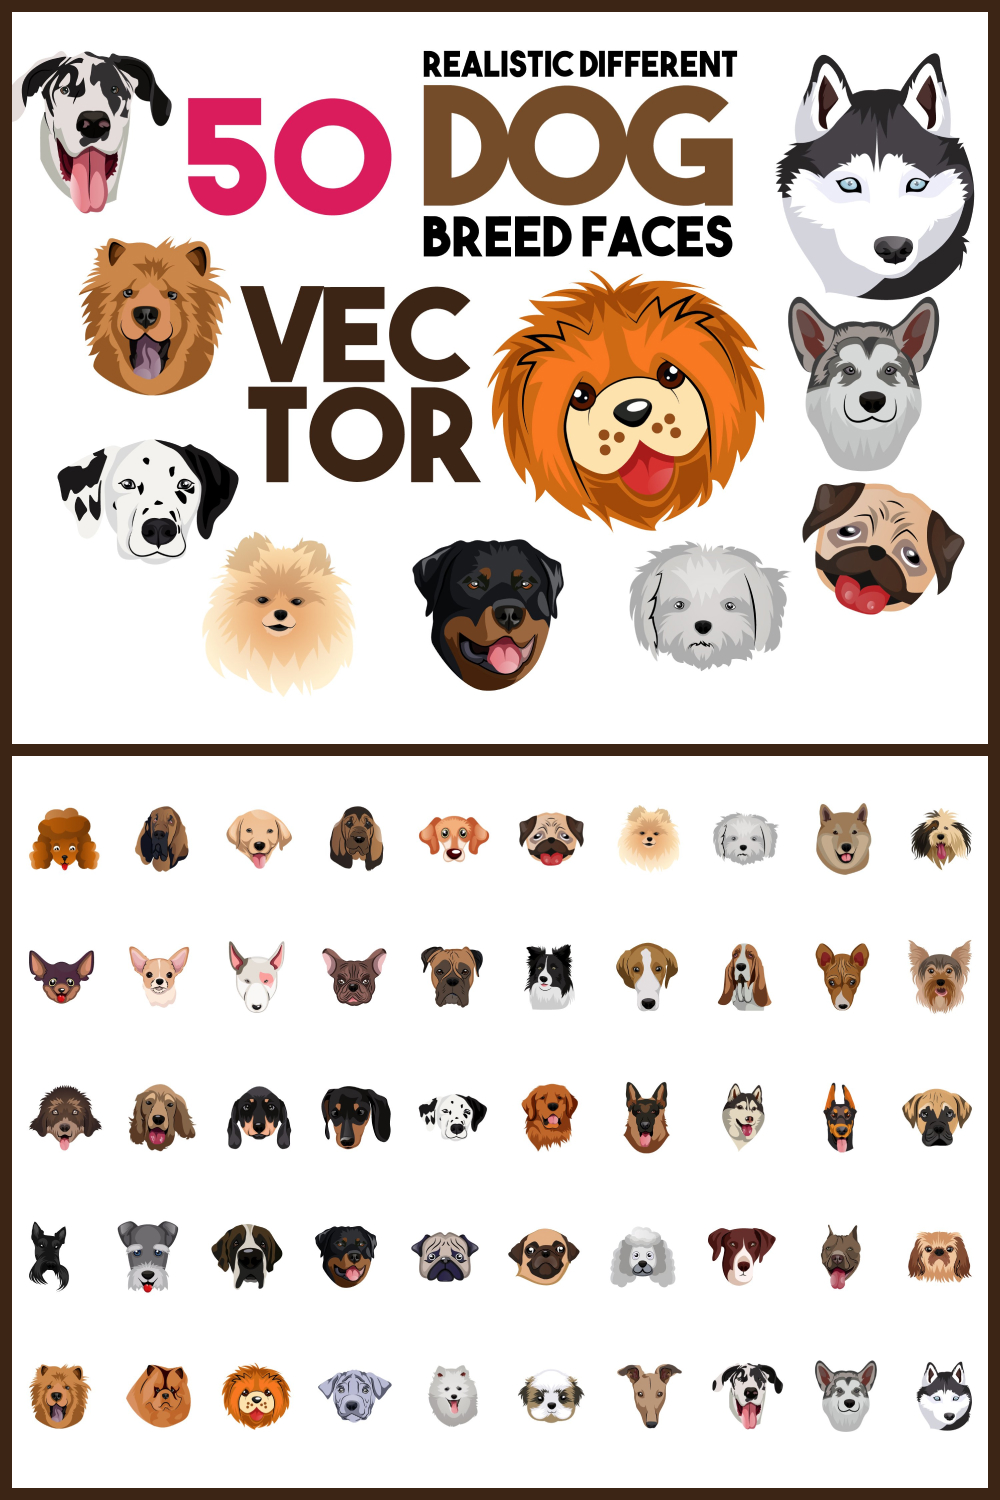 50 x realistic different dog breed faces illustration 02 706